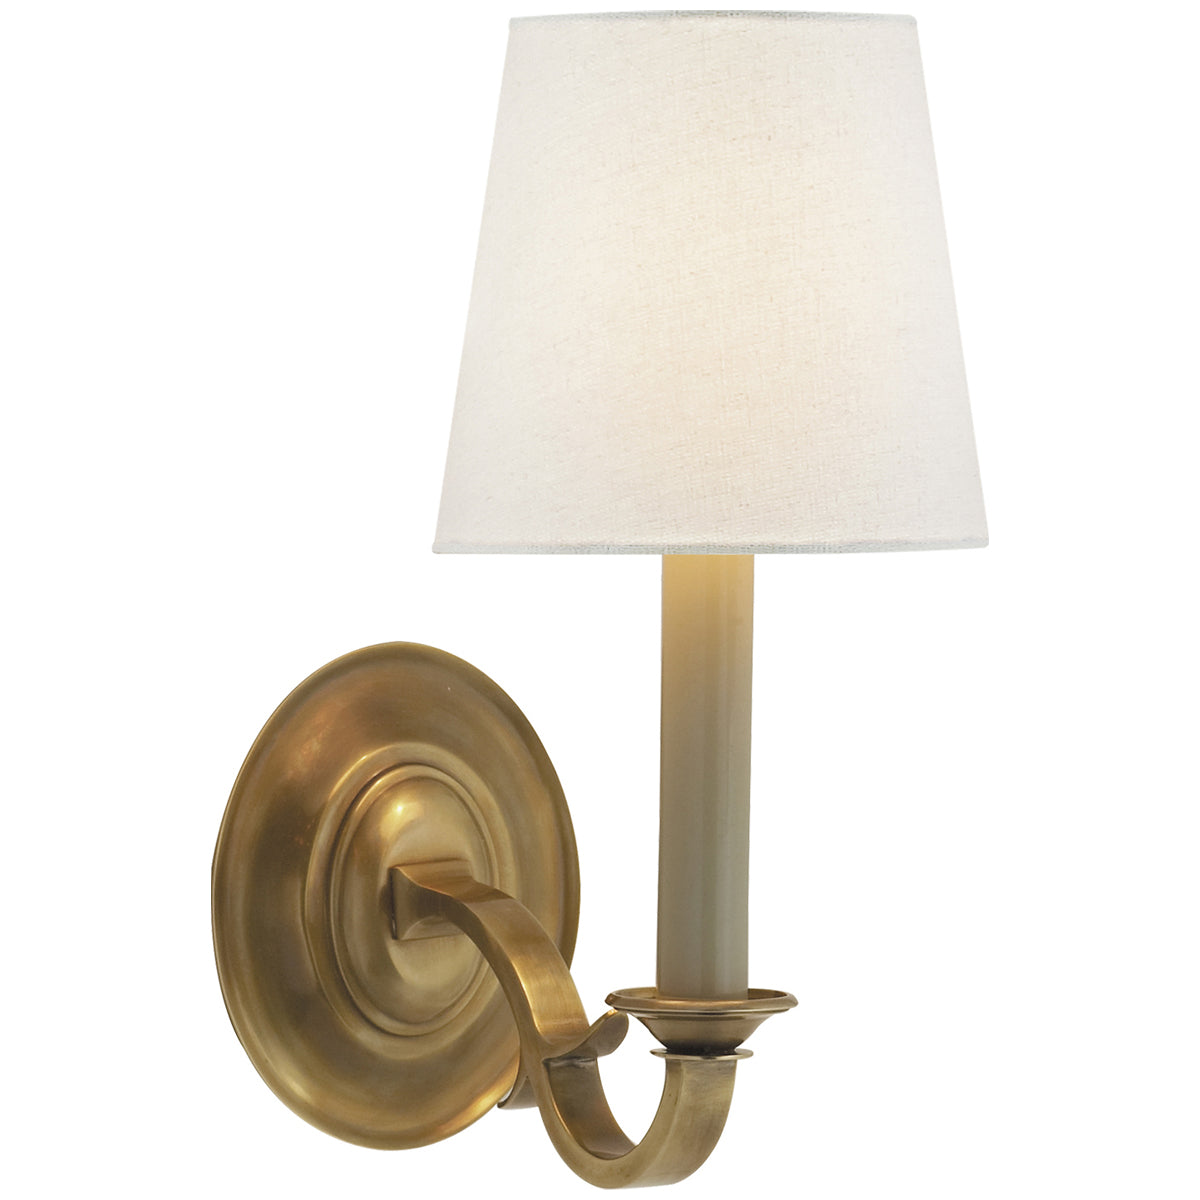 Visual Comfort Channing Single Sconce with Linen Shade